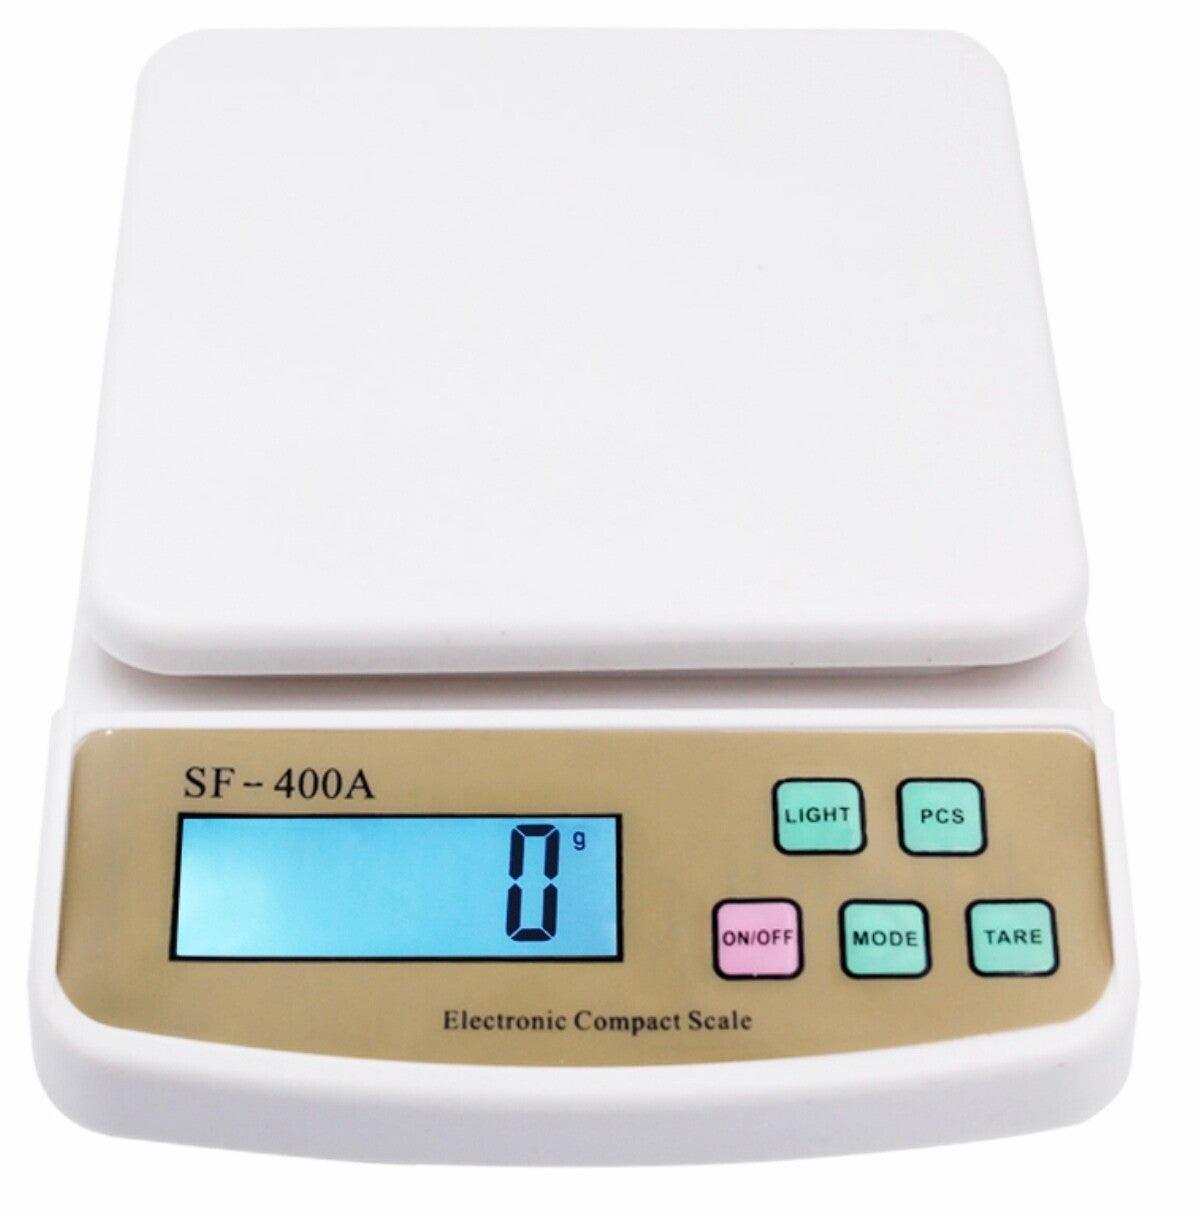 Electronic Compact Scale - Karout Online -Karout Online Shopping In lebanon - Karout Express Delivery 